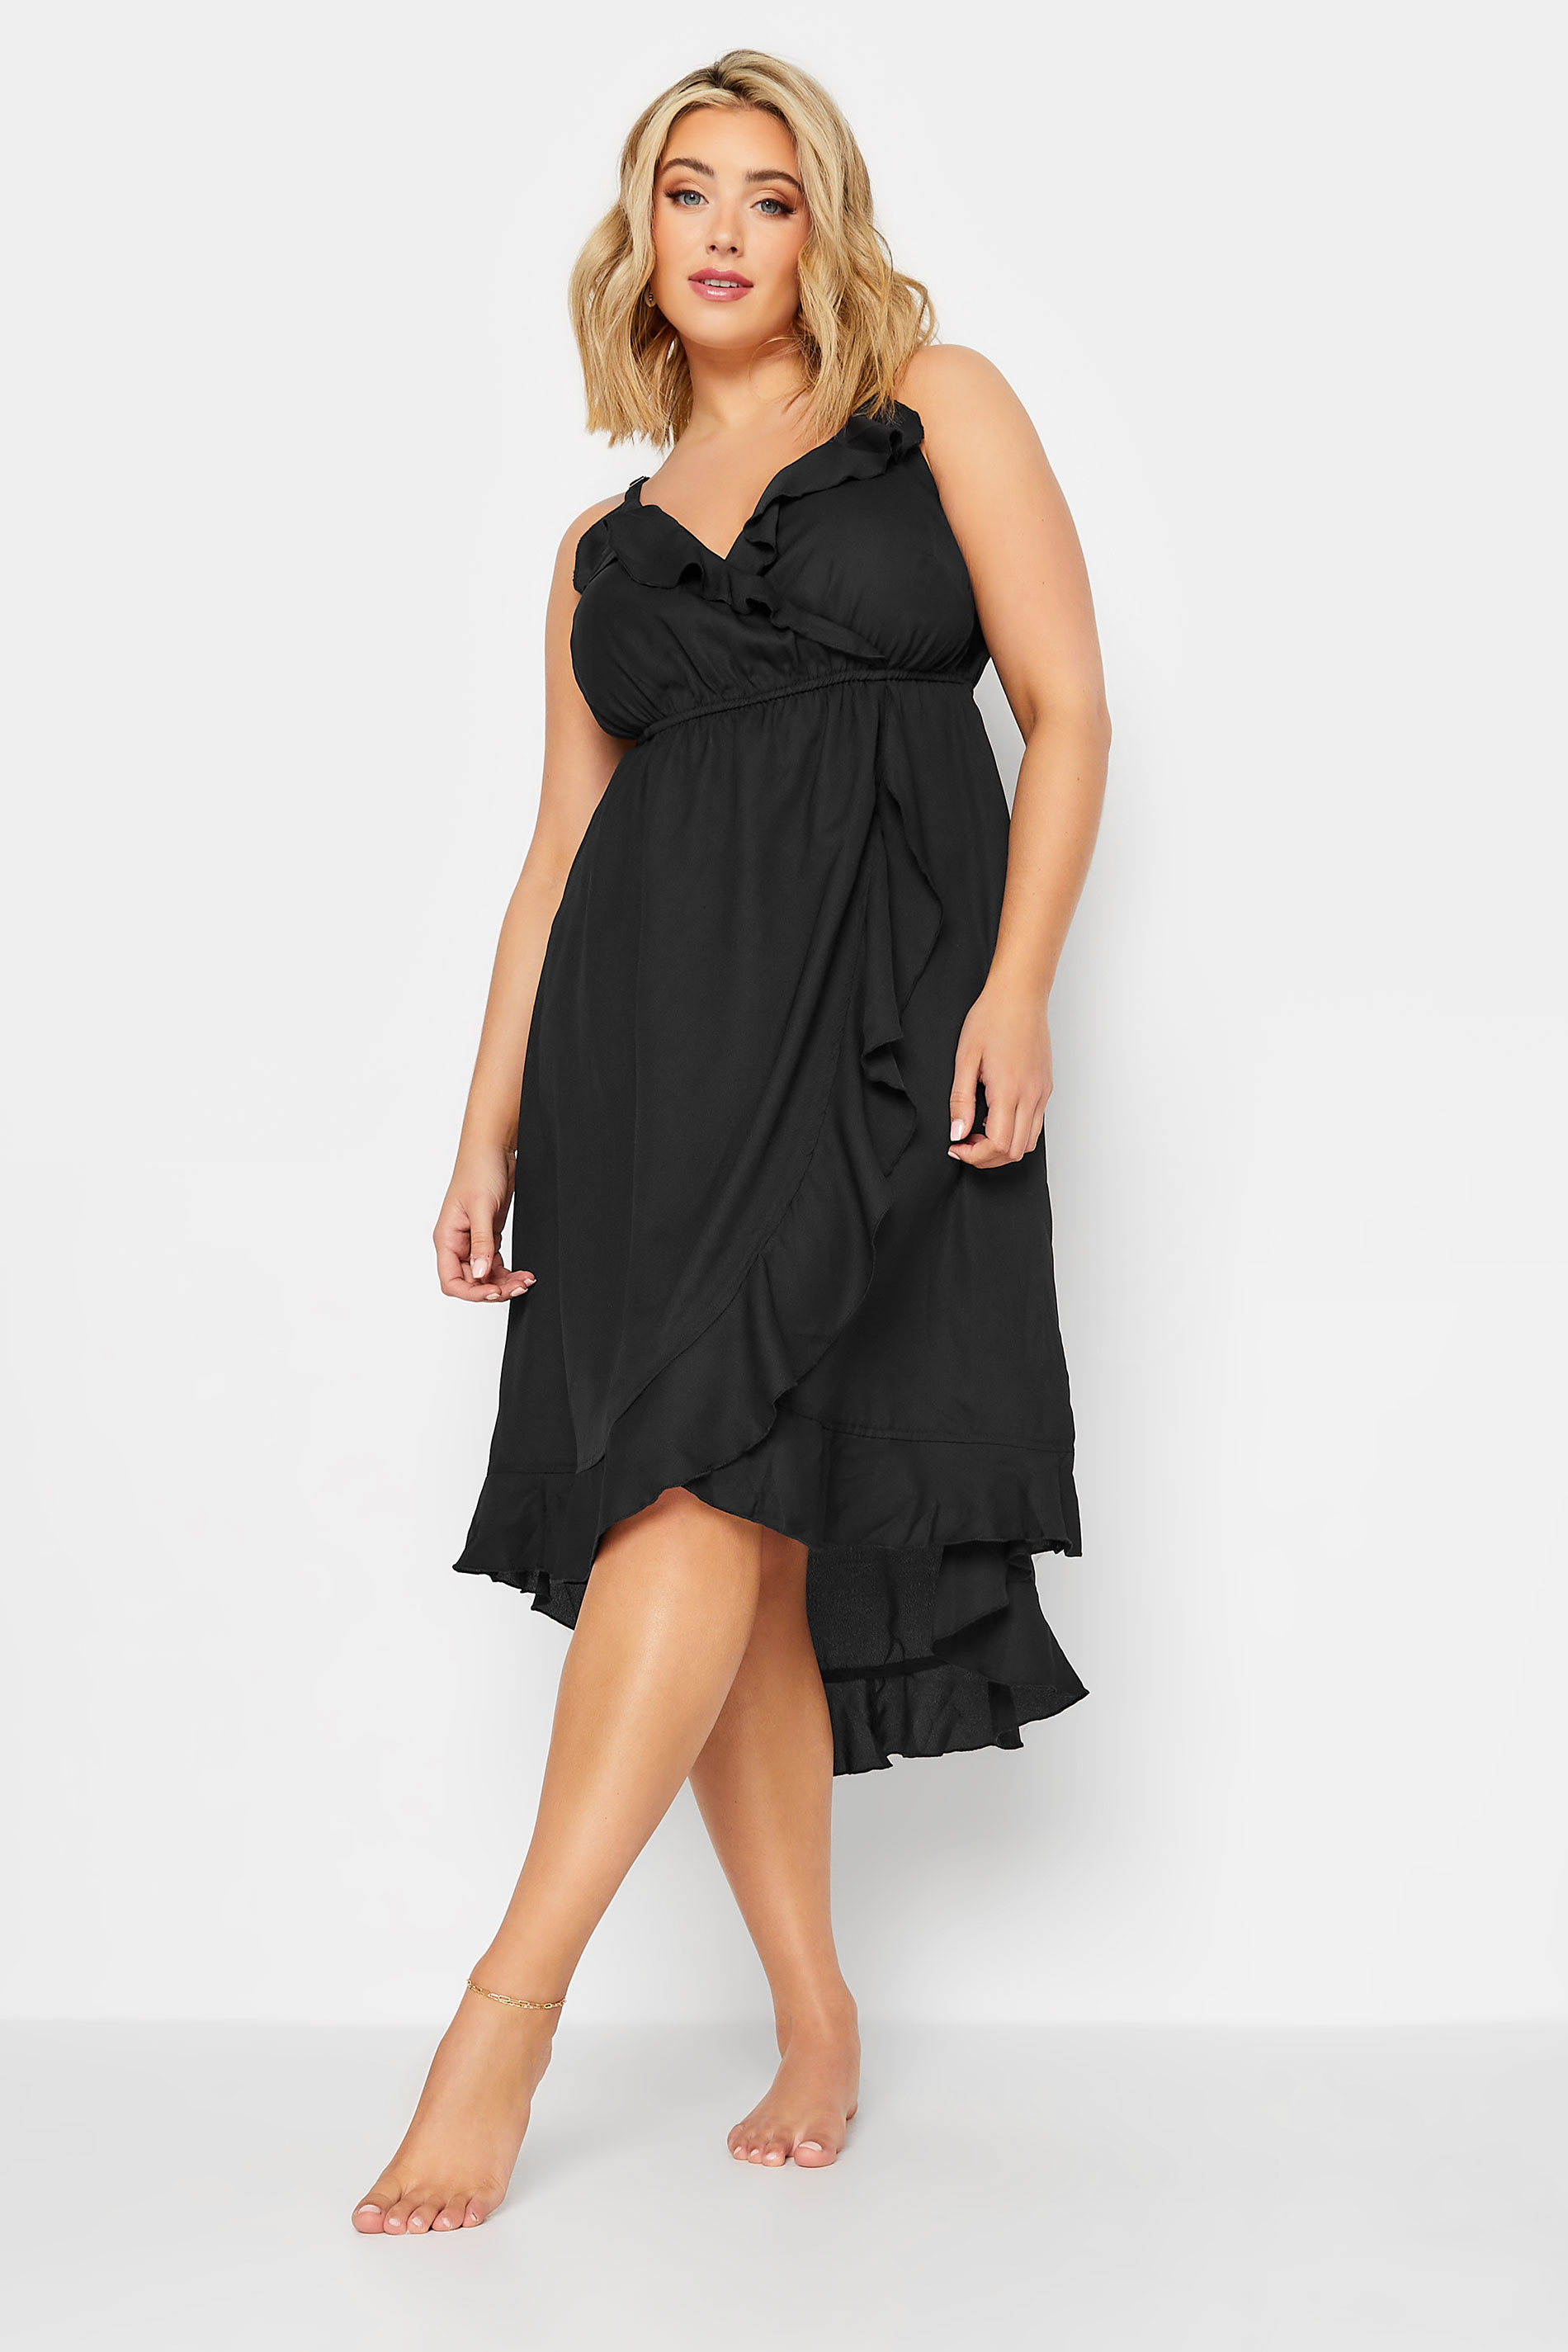 LIMITED COLLECTION Plus Size Black Frill Midaxi Wrap Dress | Yours Clothing  1